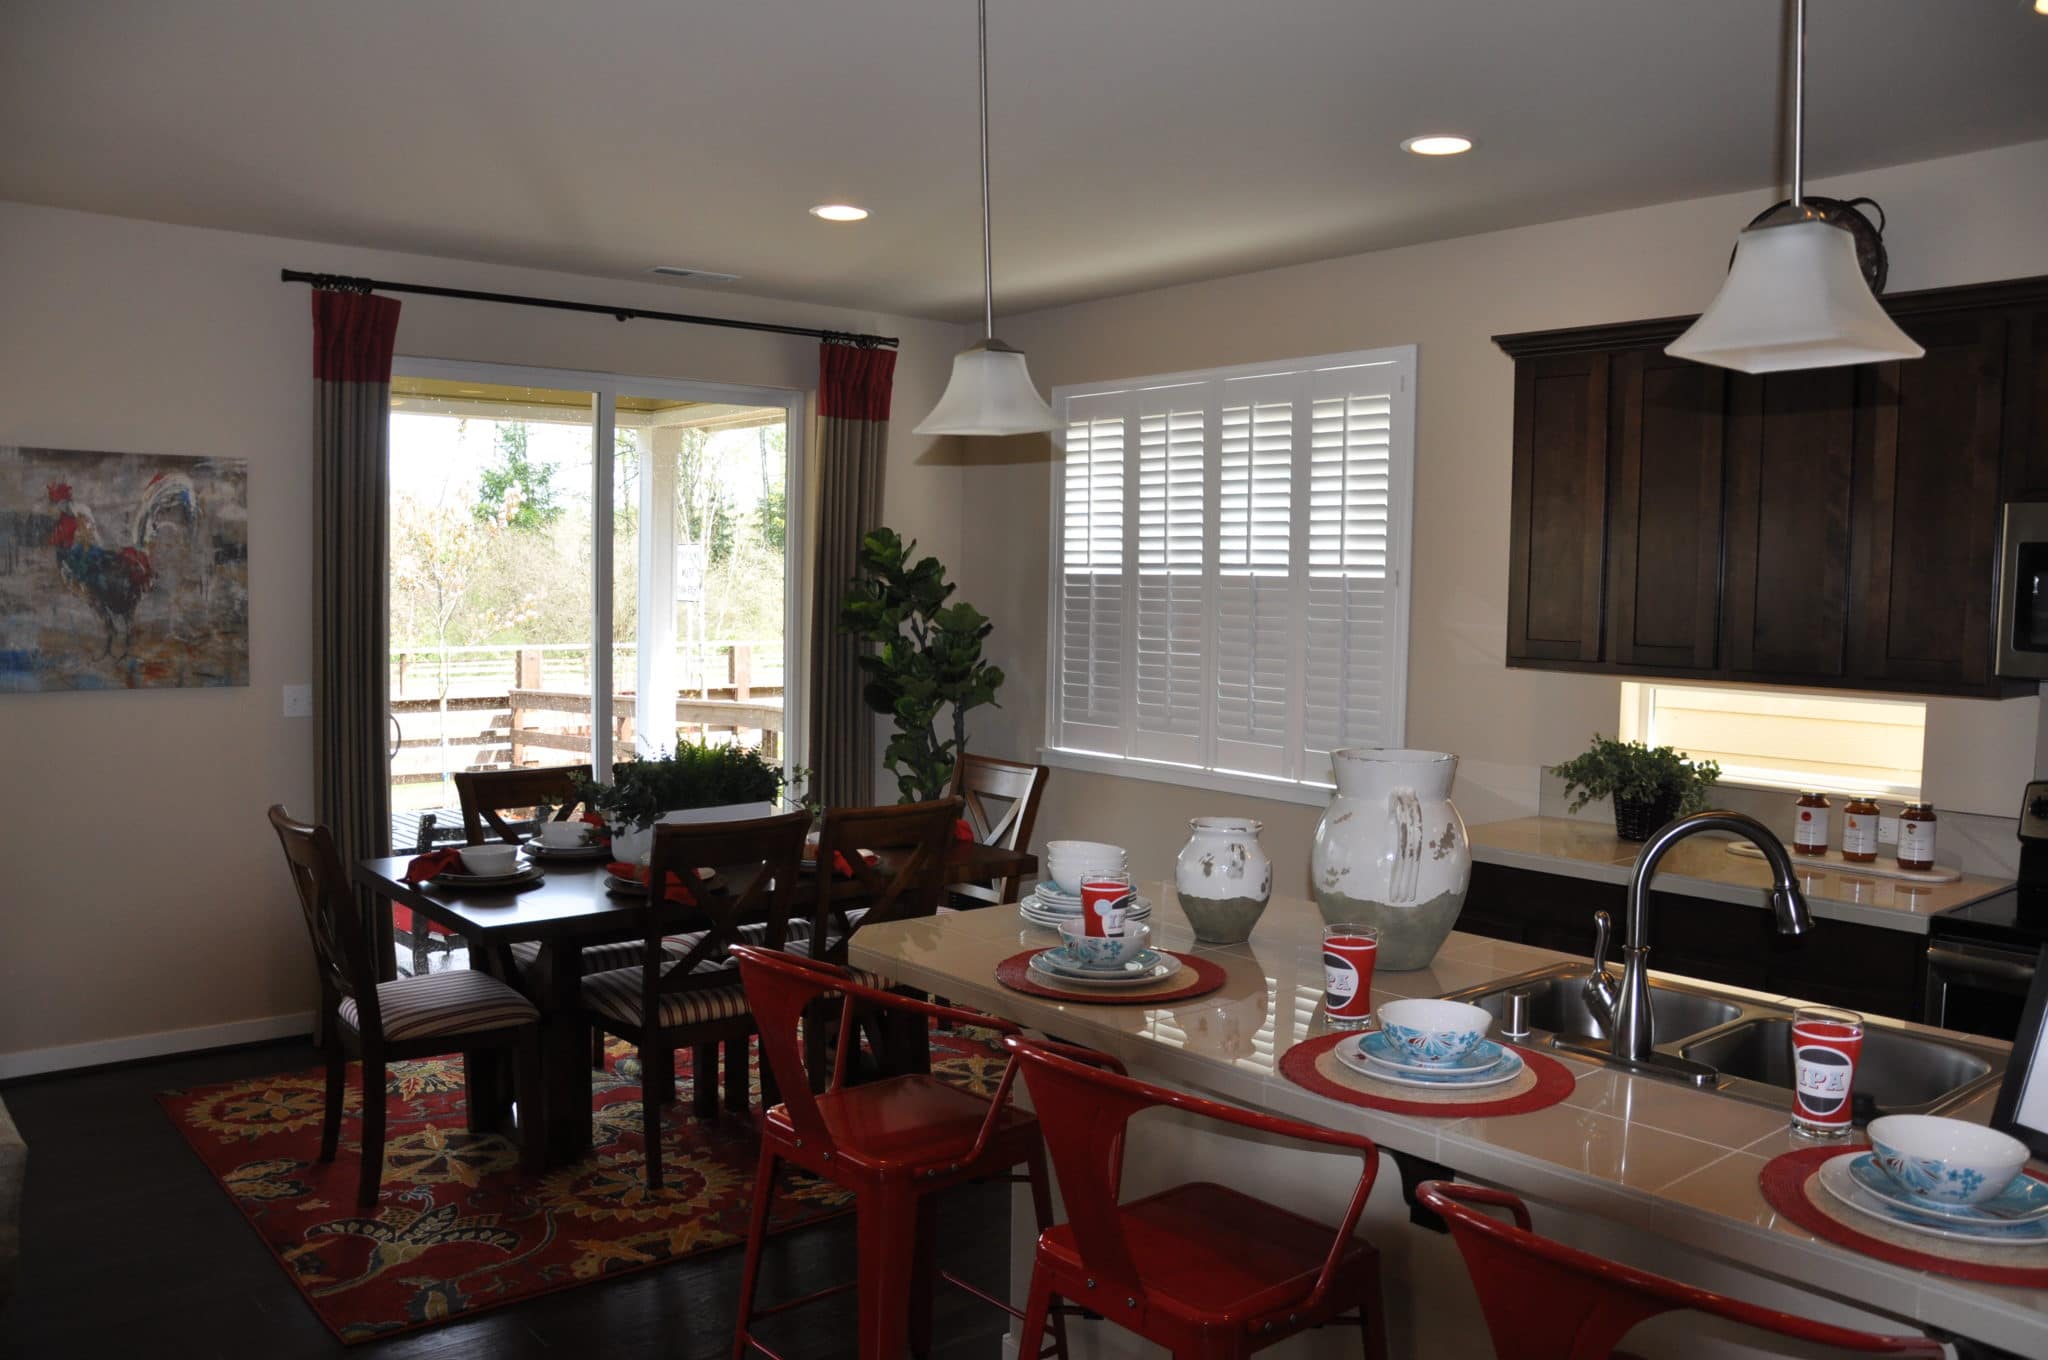 Drapes and Shutters will help you control the sunlight in you Dining and Kitchen